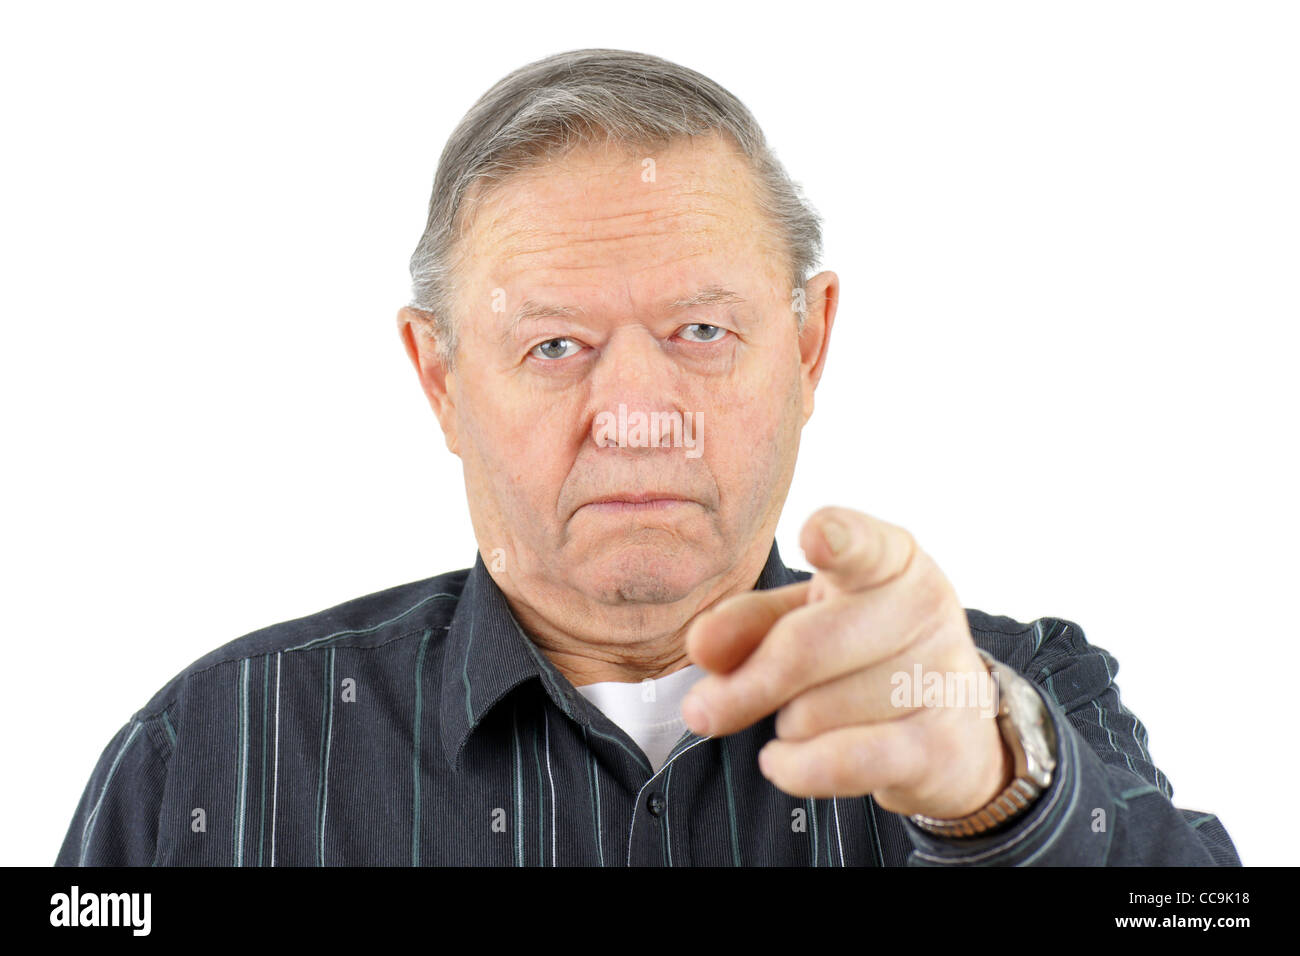 Portrait of old senior man pointing at camera looking angry. Stock Photo